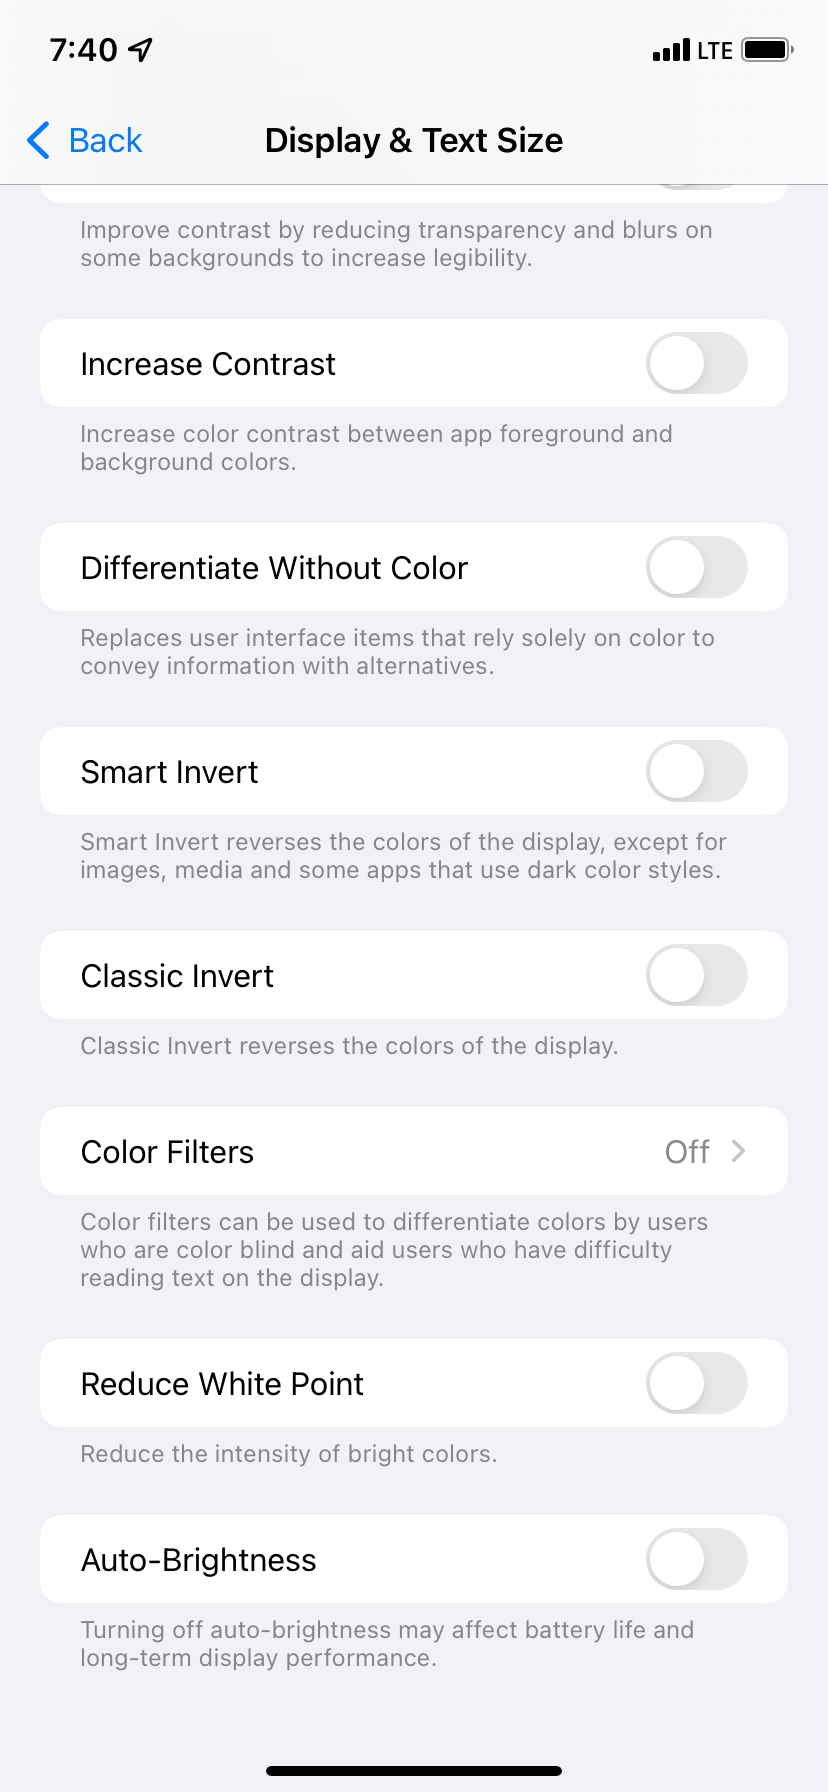 Auto-Brightness off in iPhone Settings